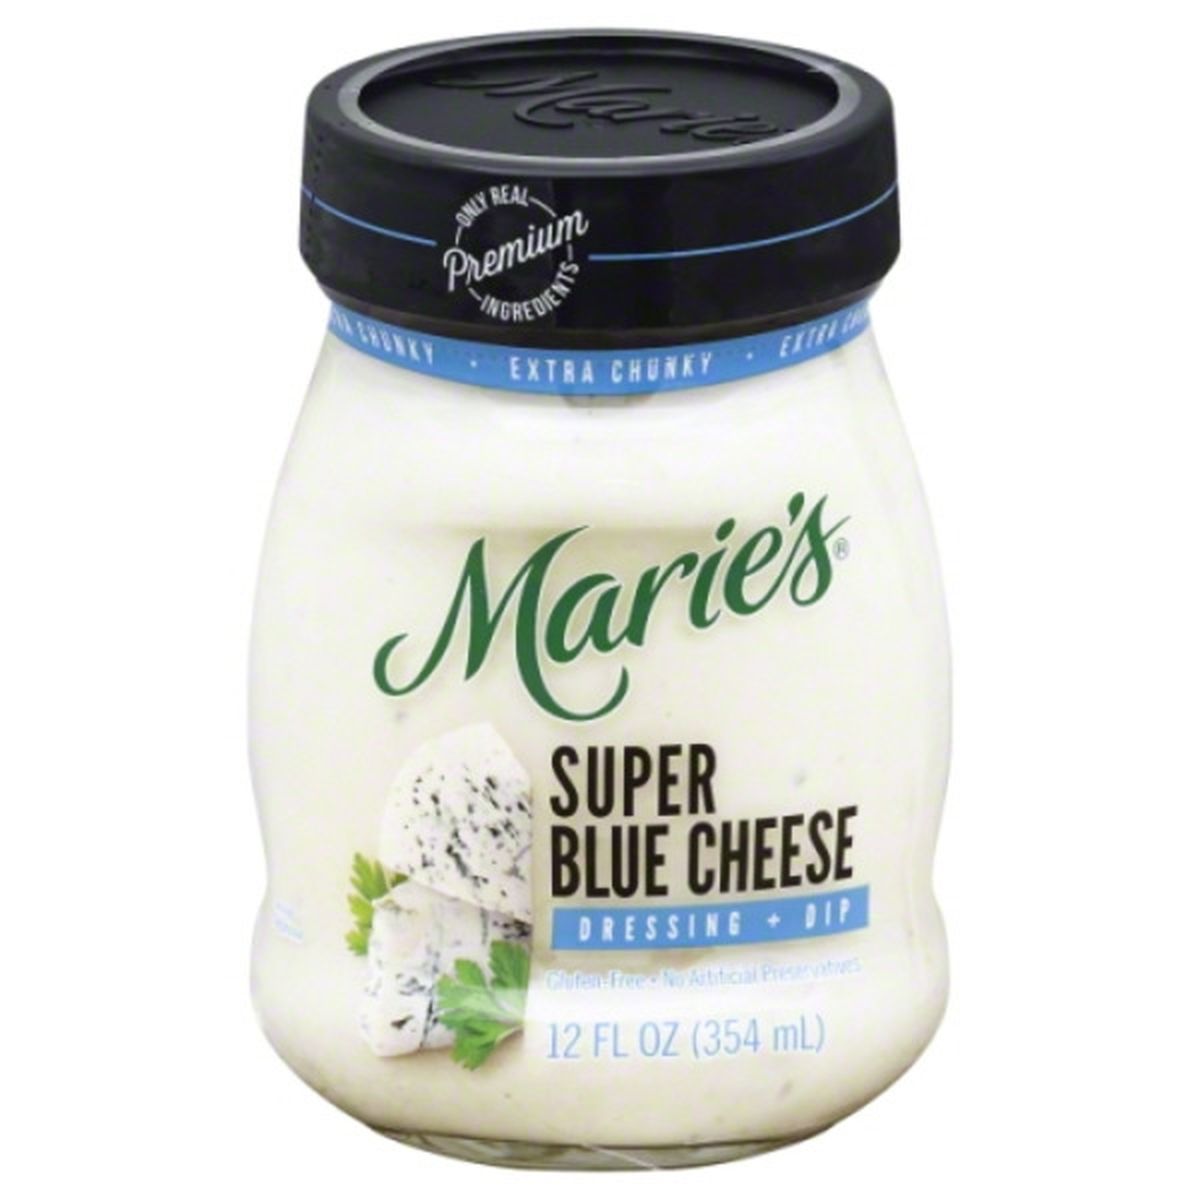 Calories in Marie's Dressing + Dip, Super Blue Cheese, Extra Chunky